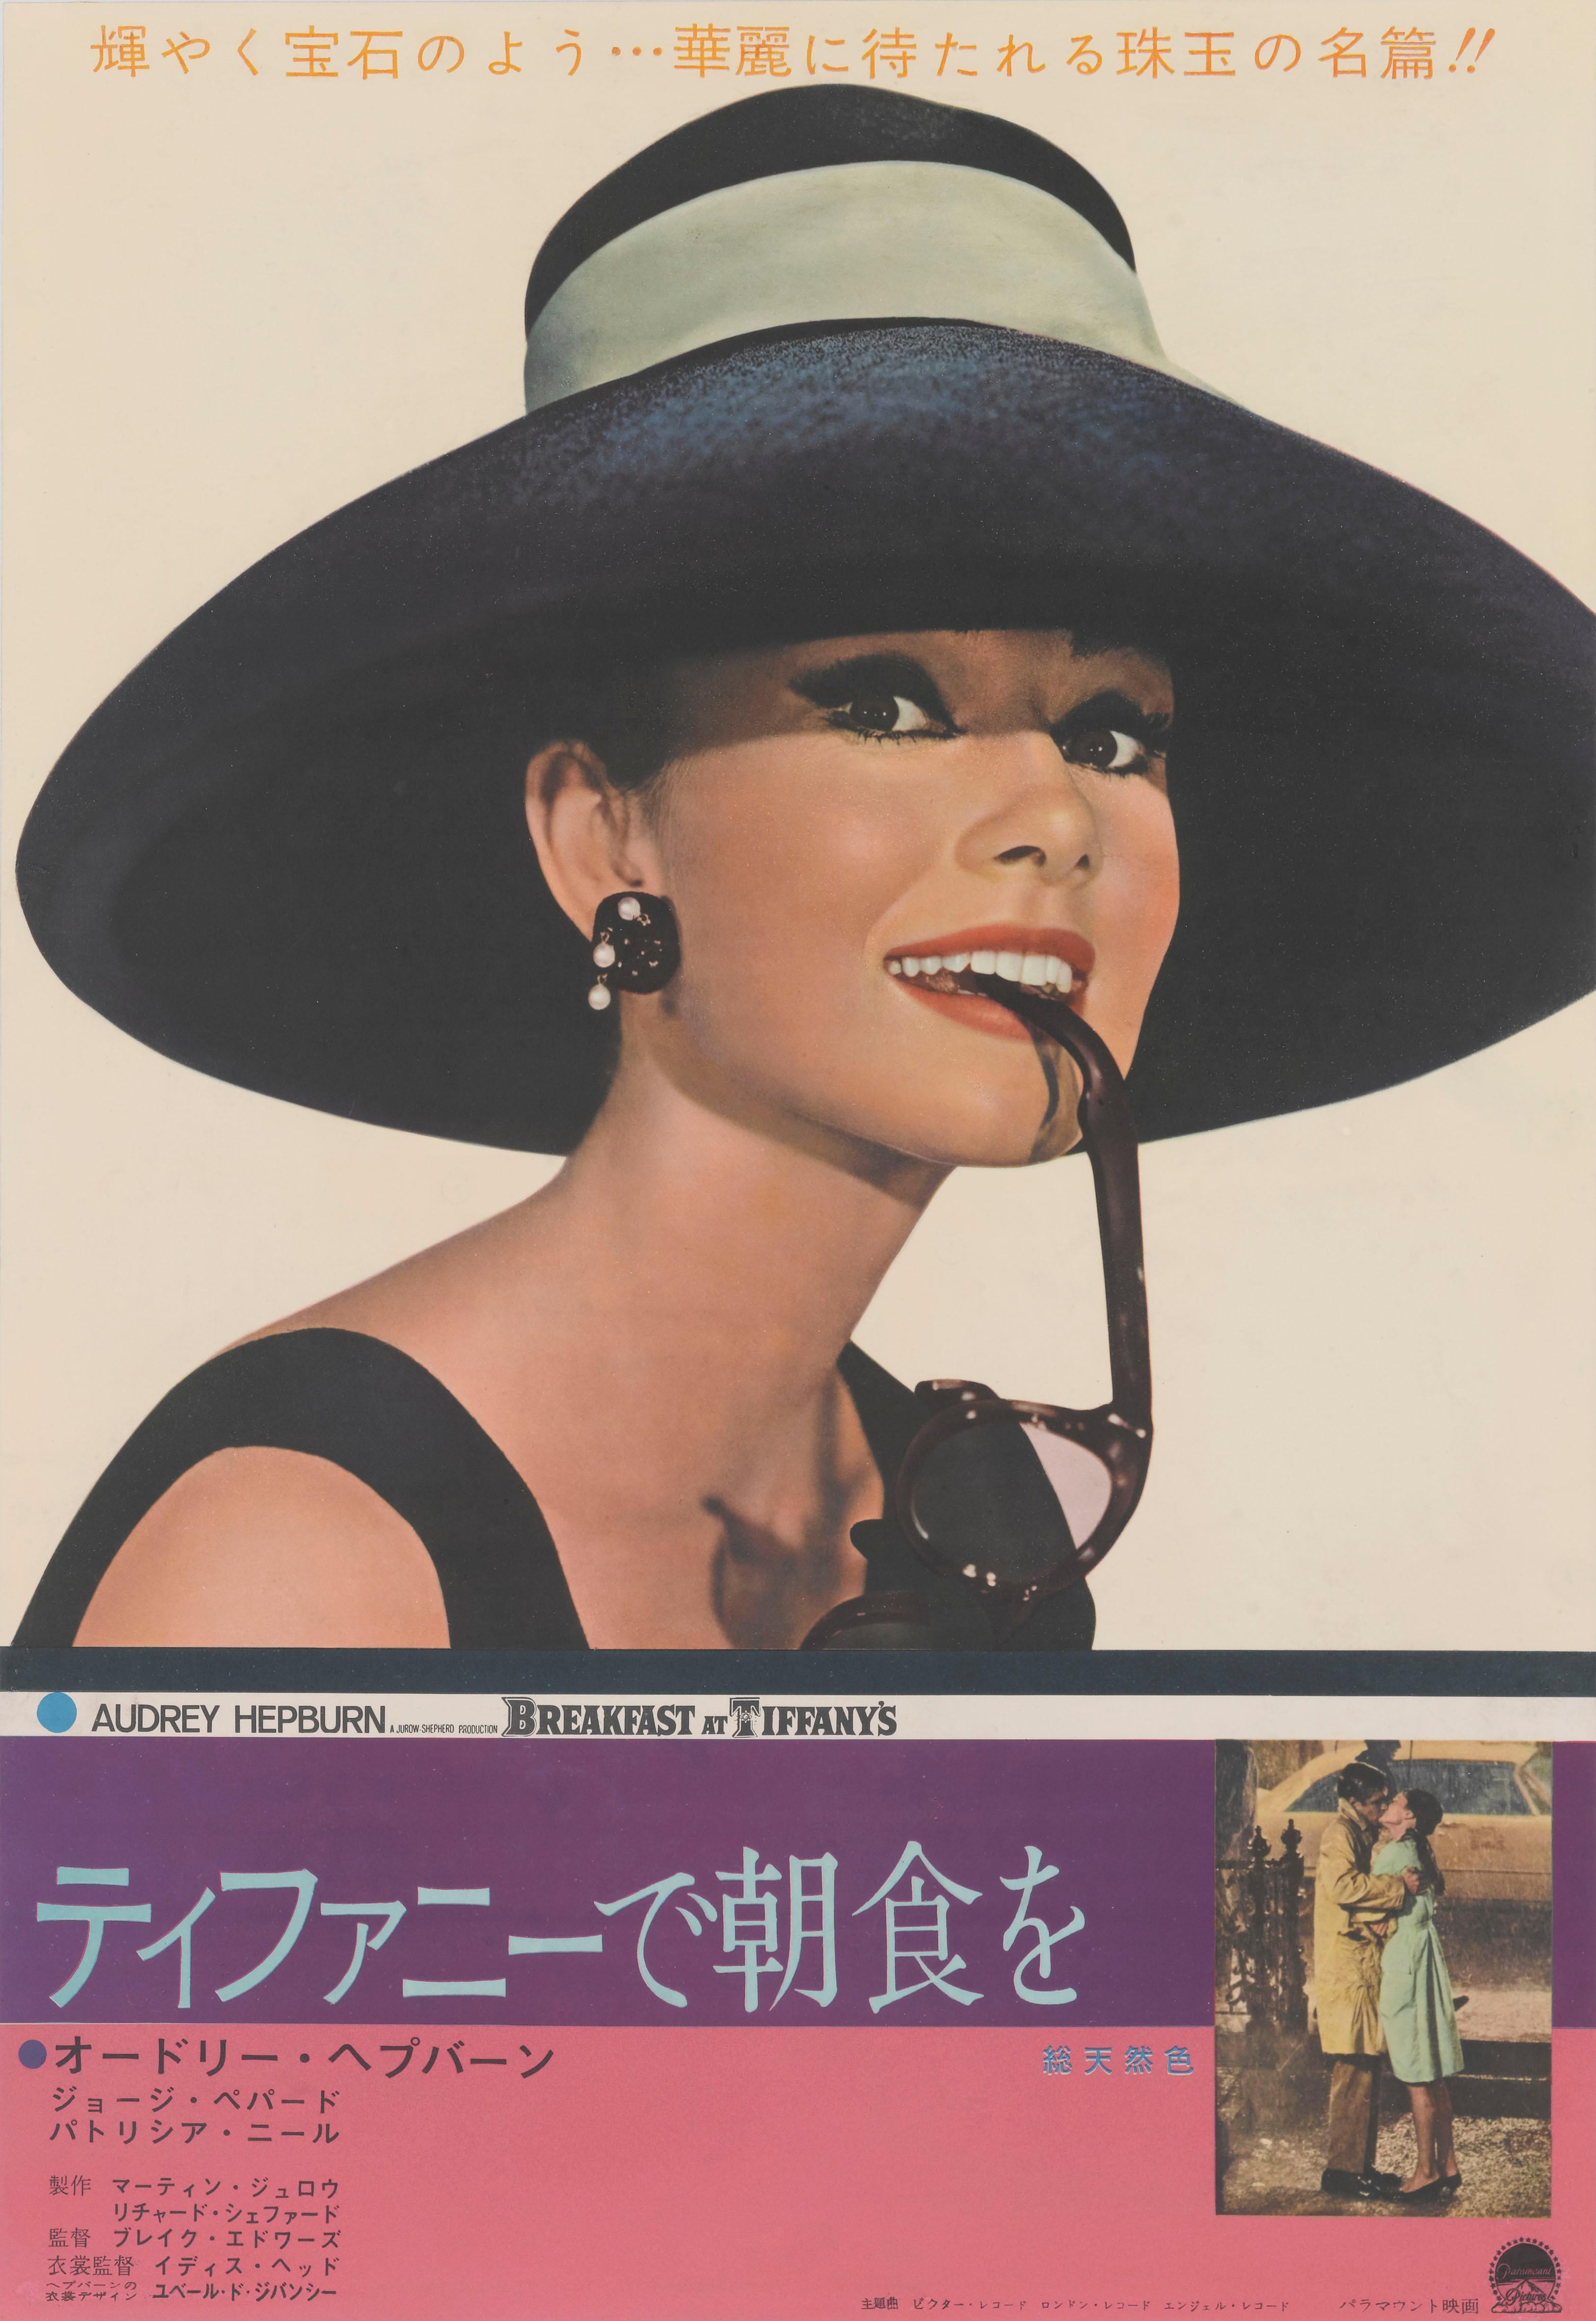 Original Japanese film poster for Audrey Hepburn's Classic 1961 film directed by Blake Edwards and starring George Peppard, Audrey Hepburn. This poster is exceptionally rare with only a couple of examples ever turning up outside of Japan. The